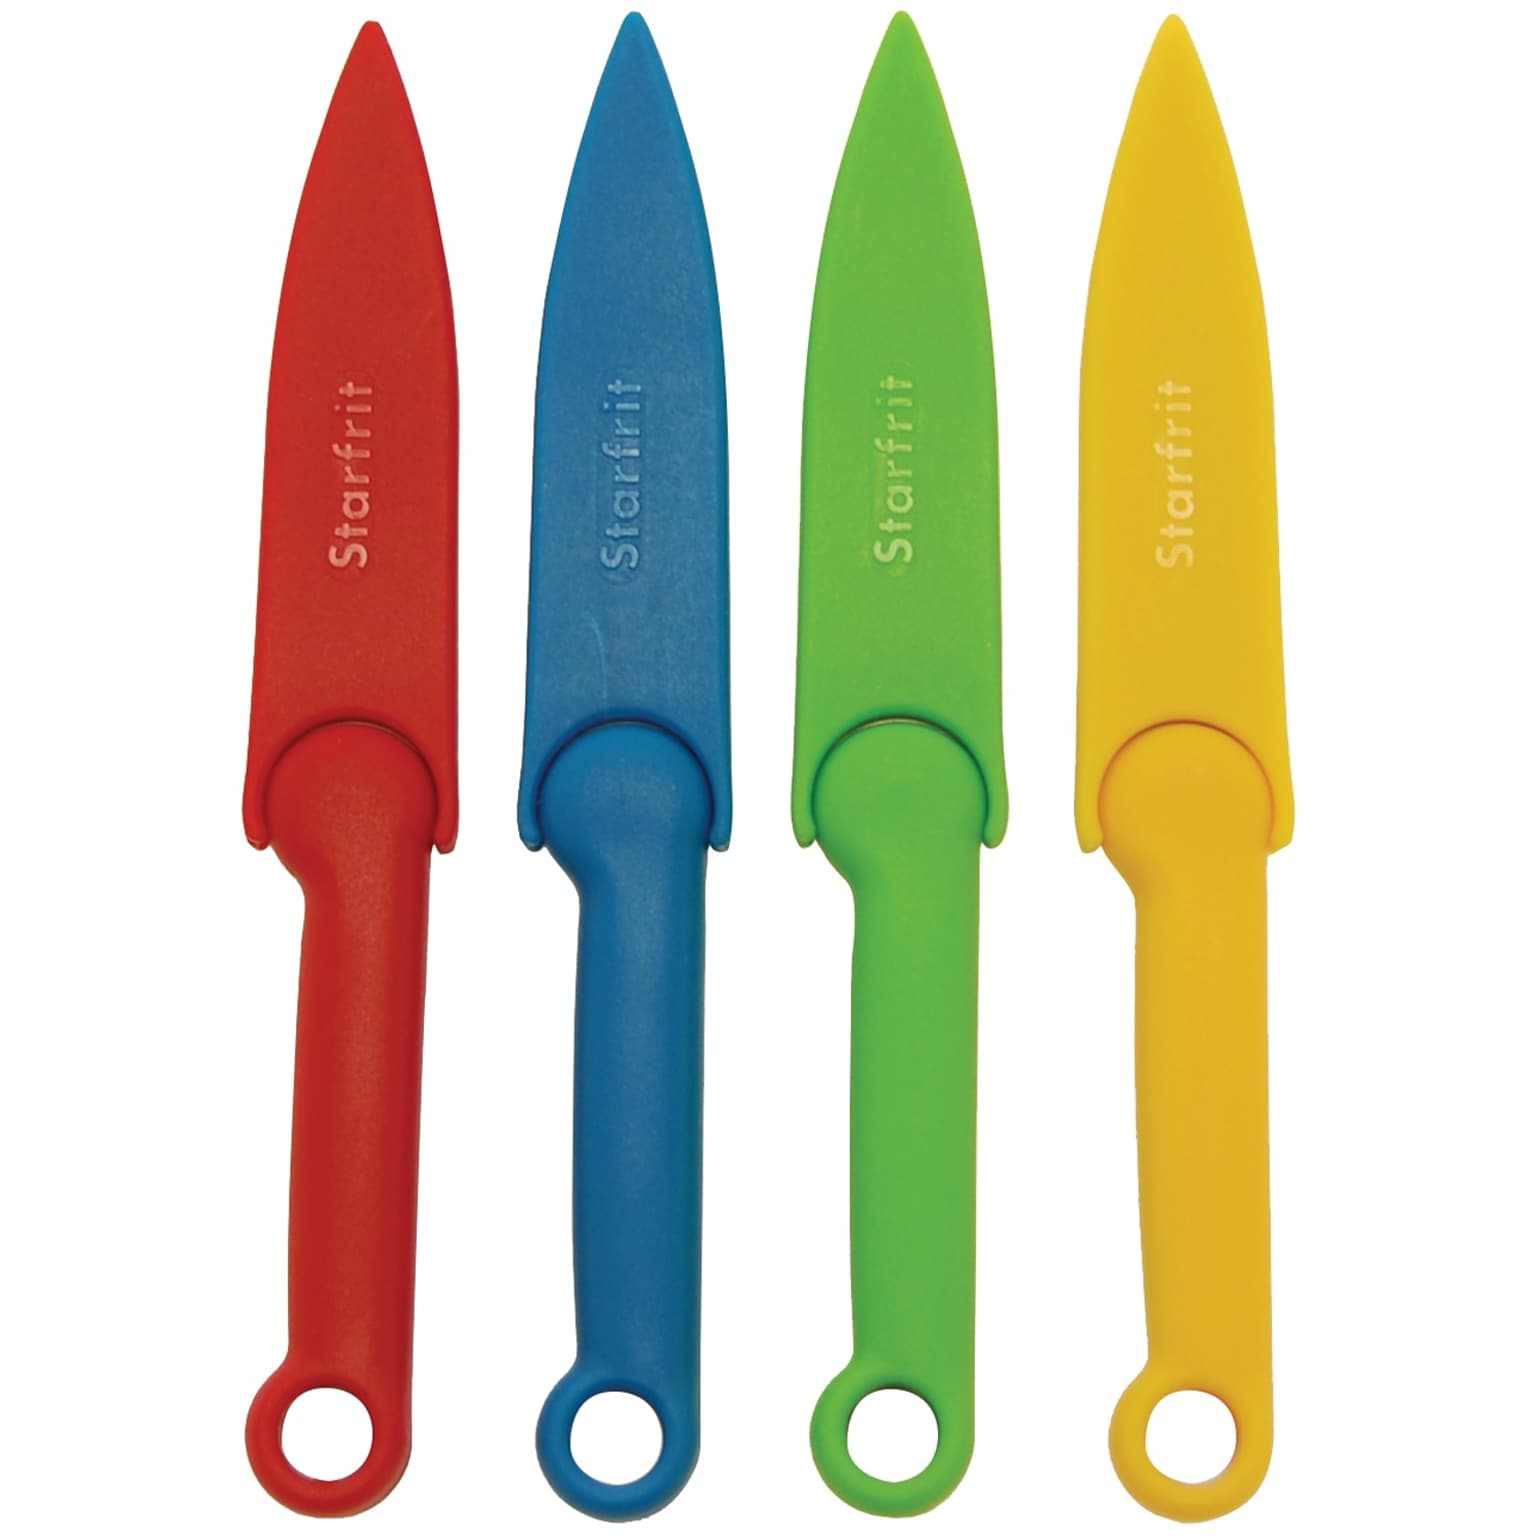 Starfrit Paring Knife Set With Covers (093401-006-0000)